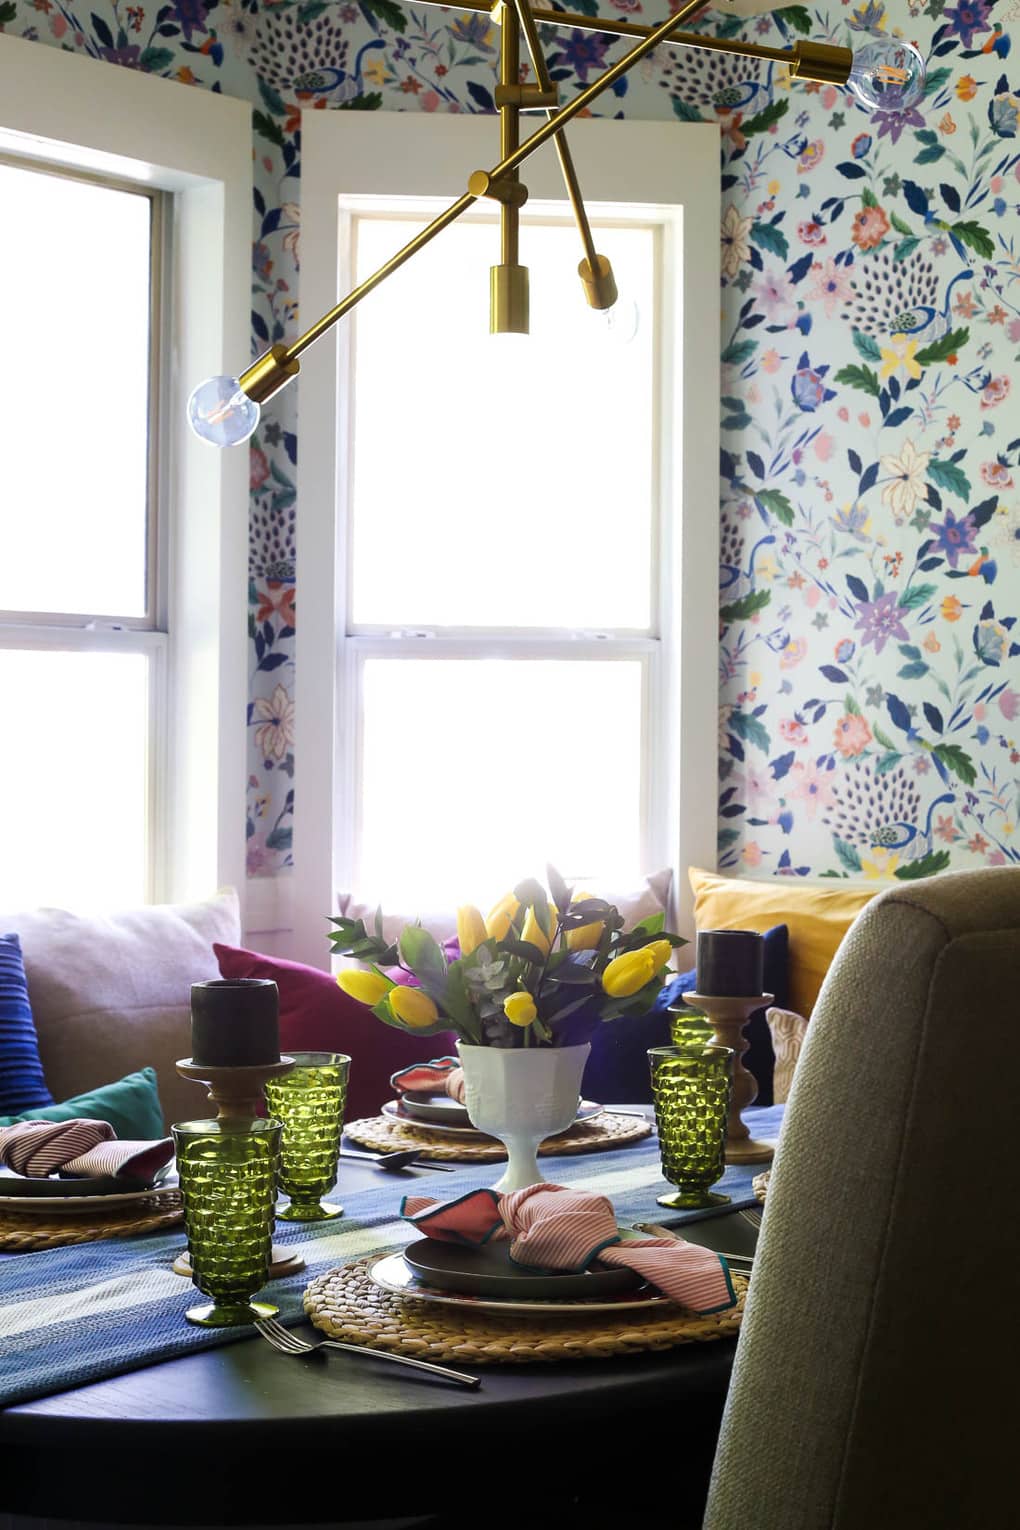 How to Install Wallpaper (Plus an Anthropologie Wallpaper Review)